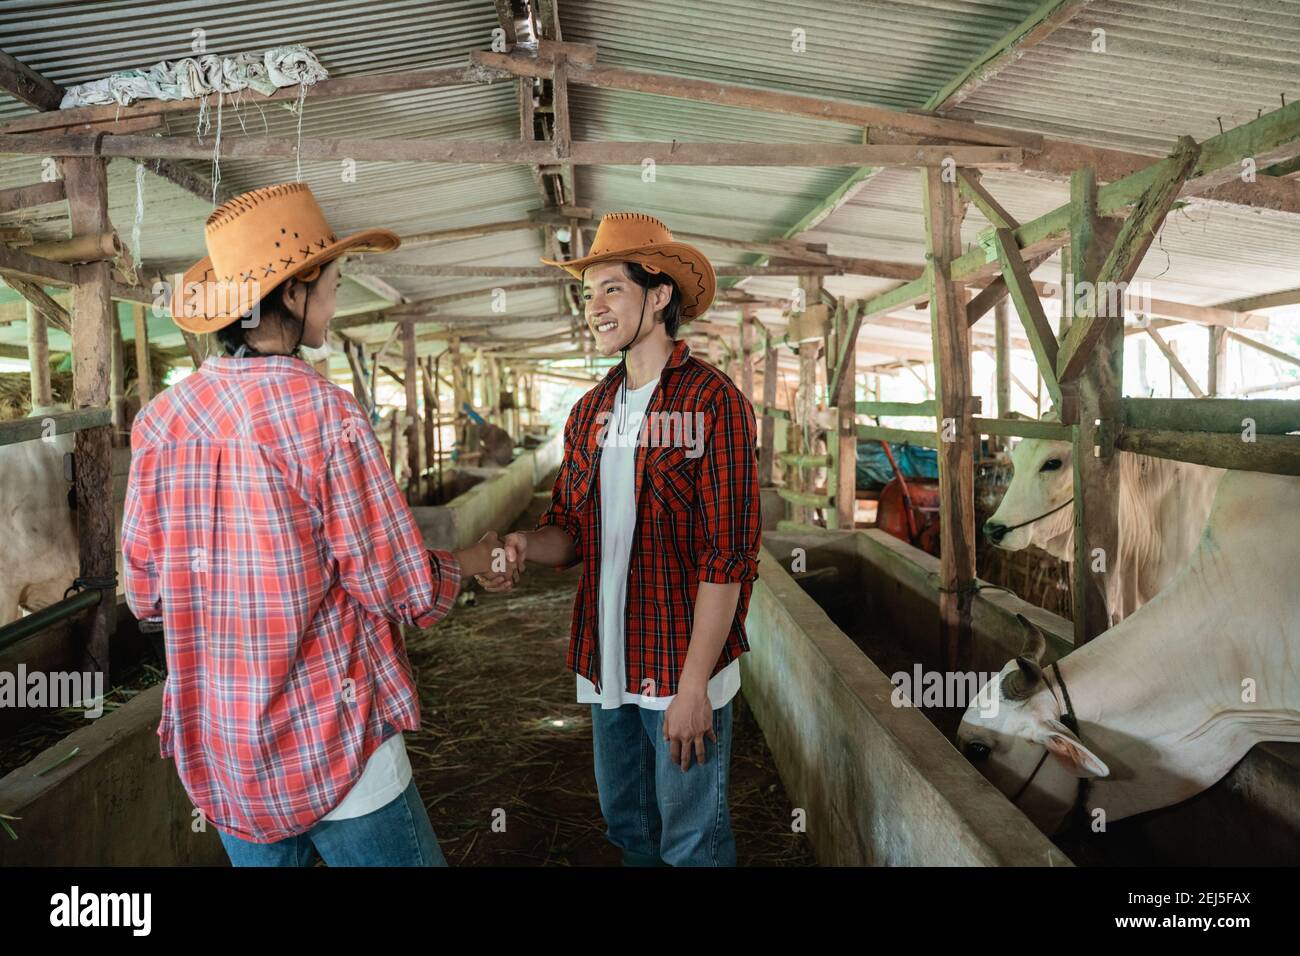 woman wearing hats shaking hands with man in cattle sheds Stock Photo